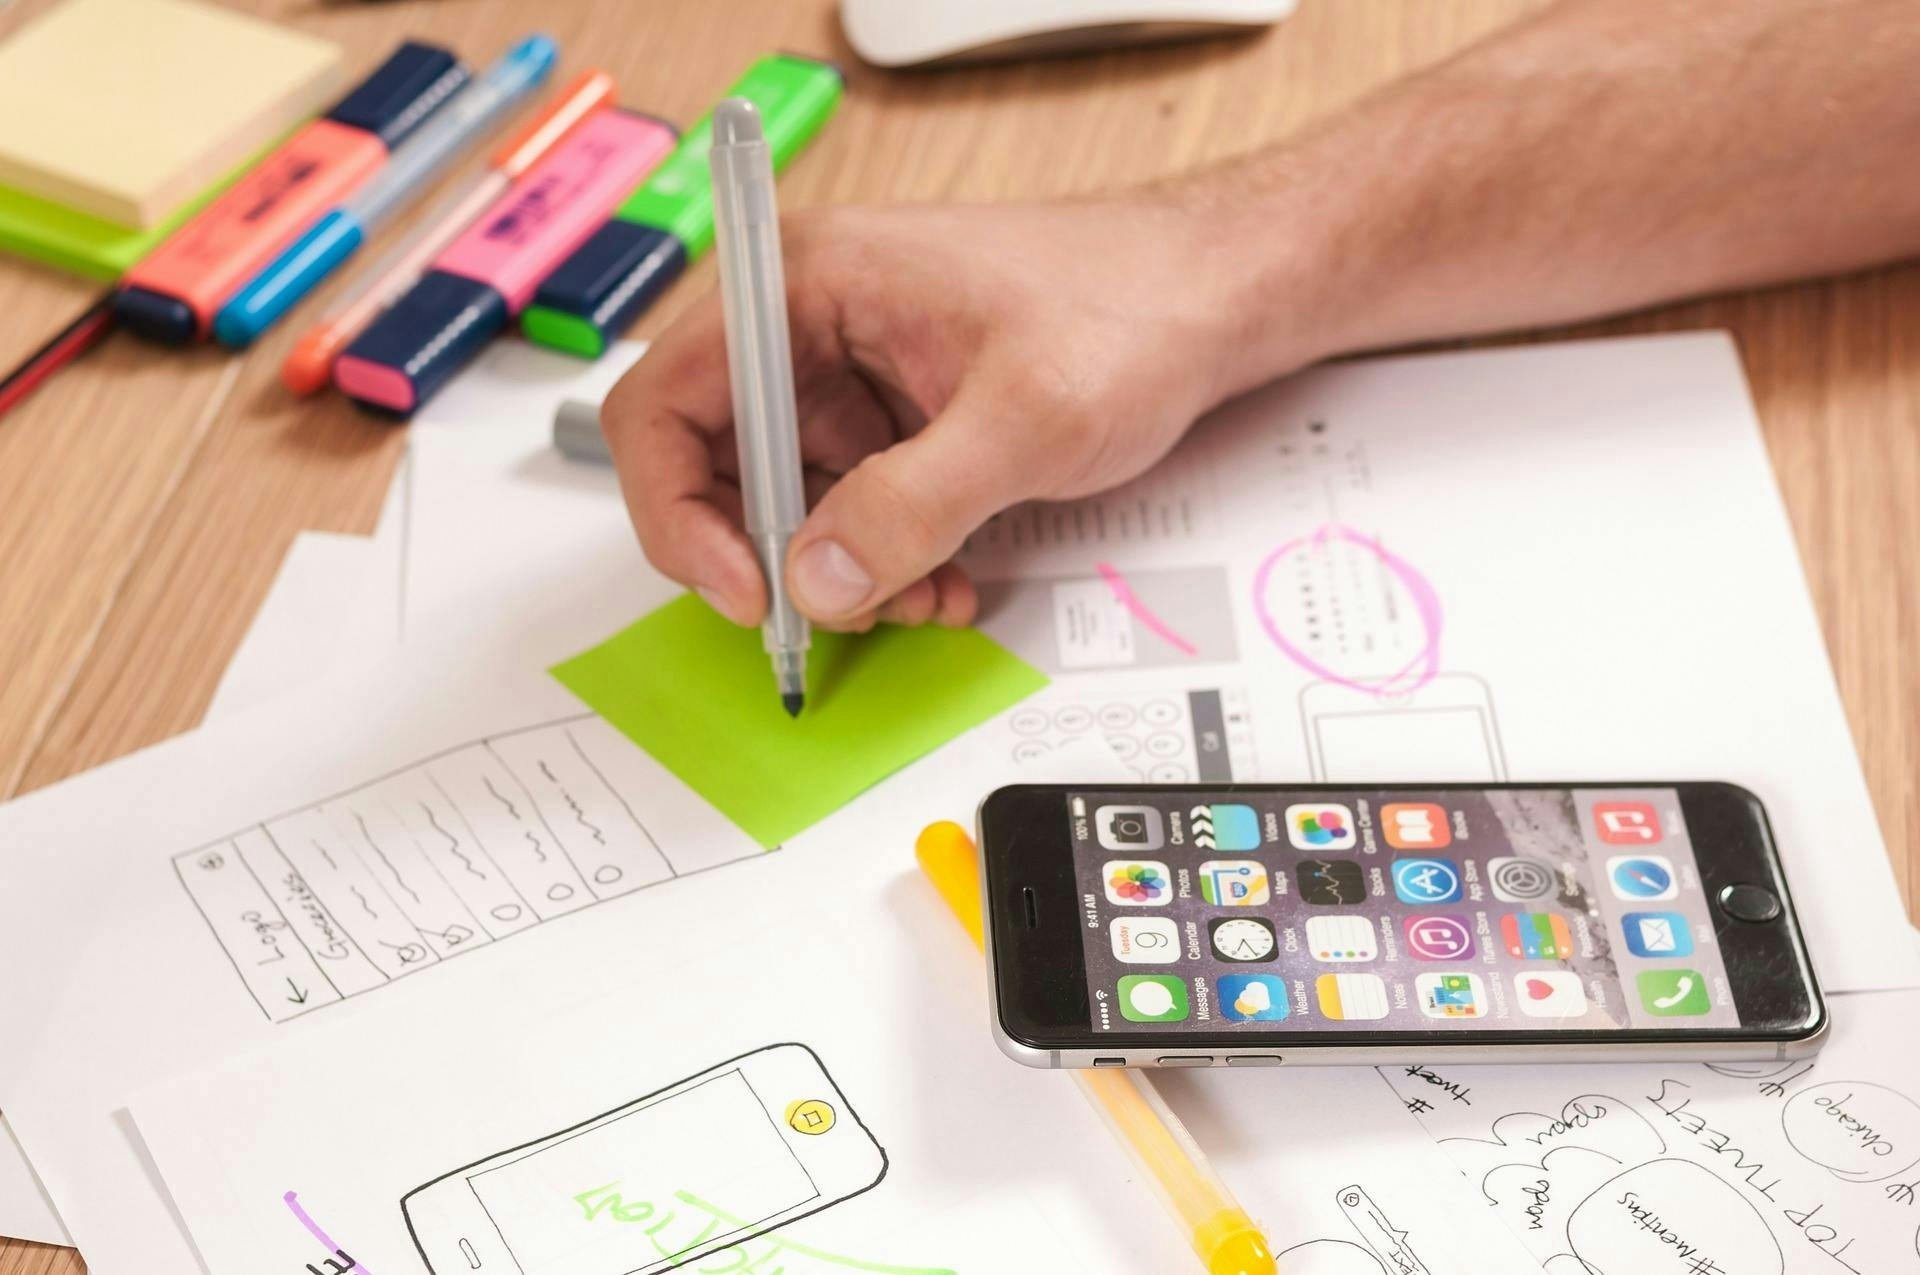 Marketer writing on a green sticky note with an iPhone unlocked showing multiple apps. 